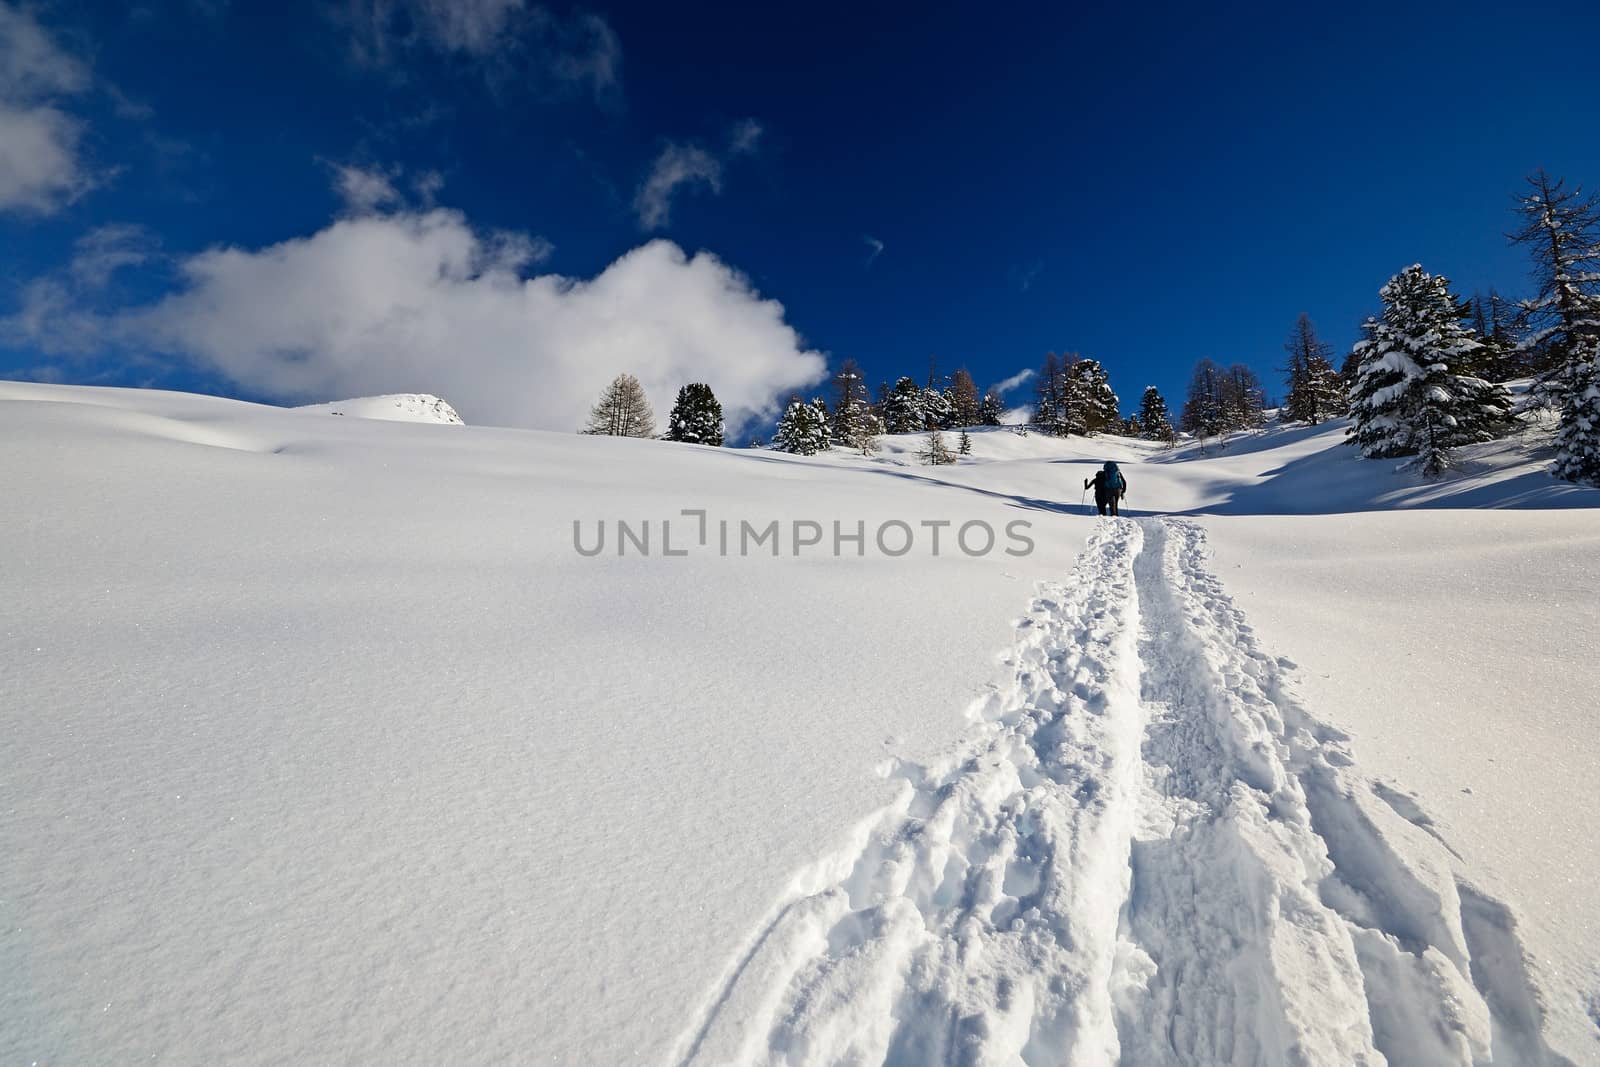 Alpinist hiking on snowy slope in scenic high mountain landscape, italian Alps